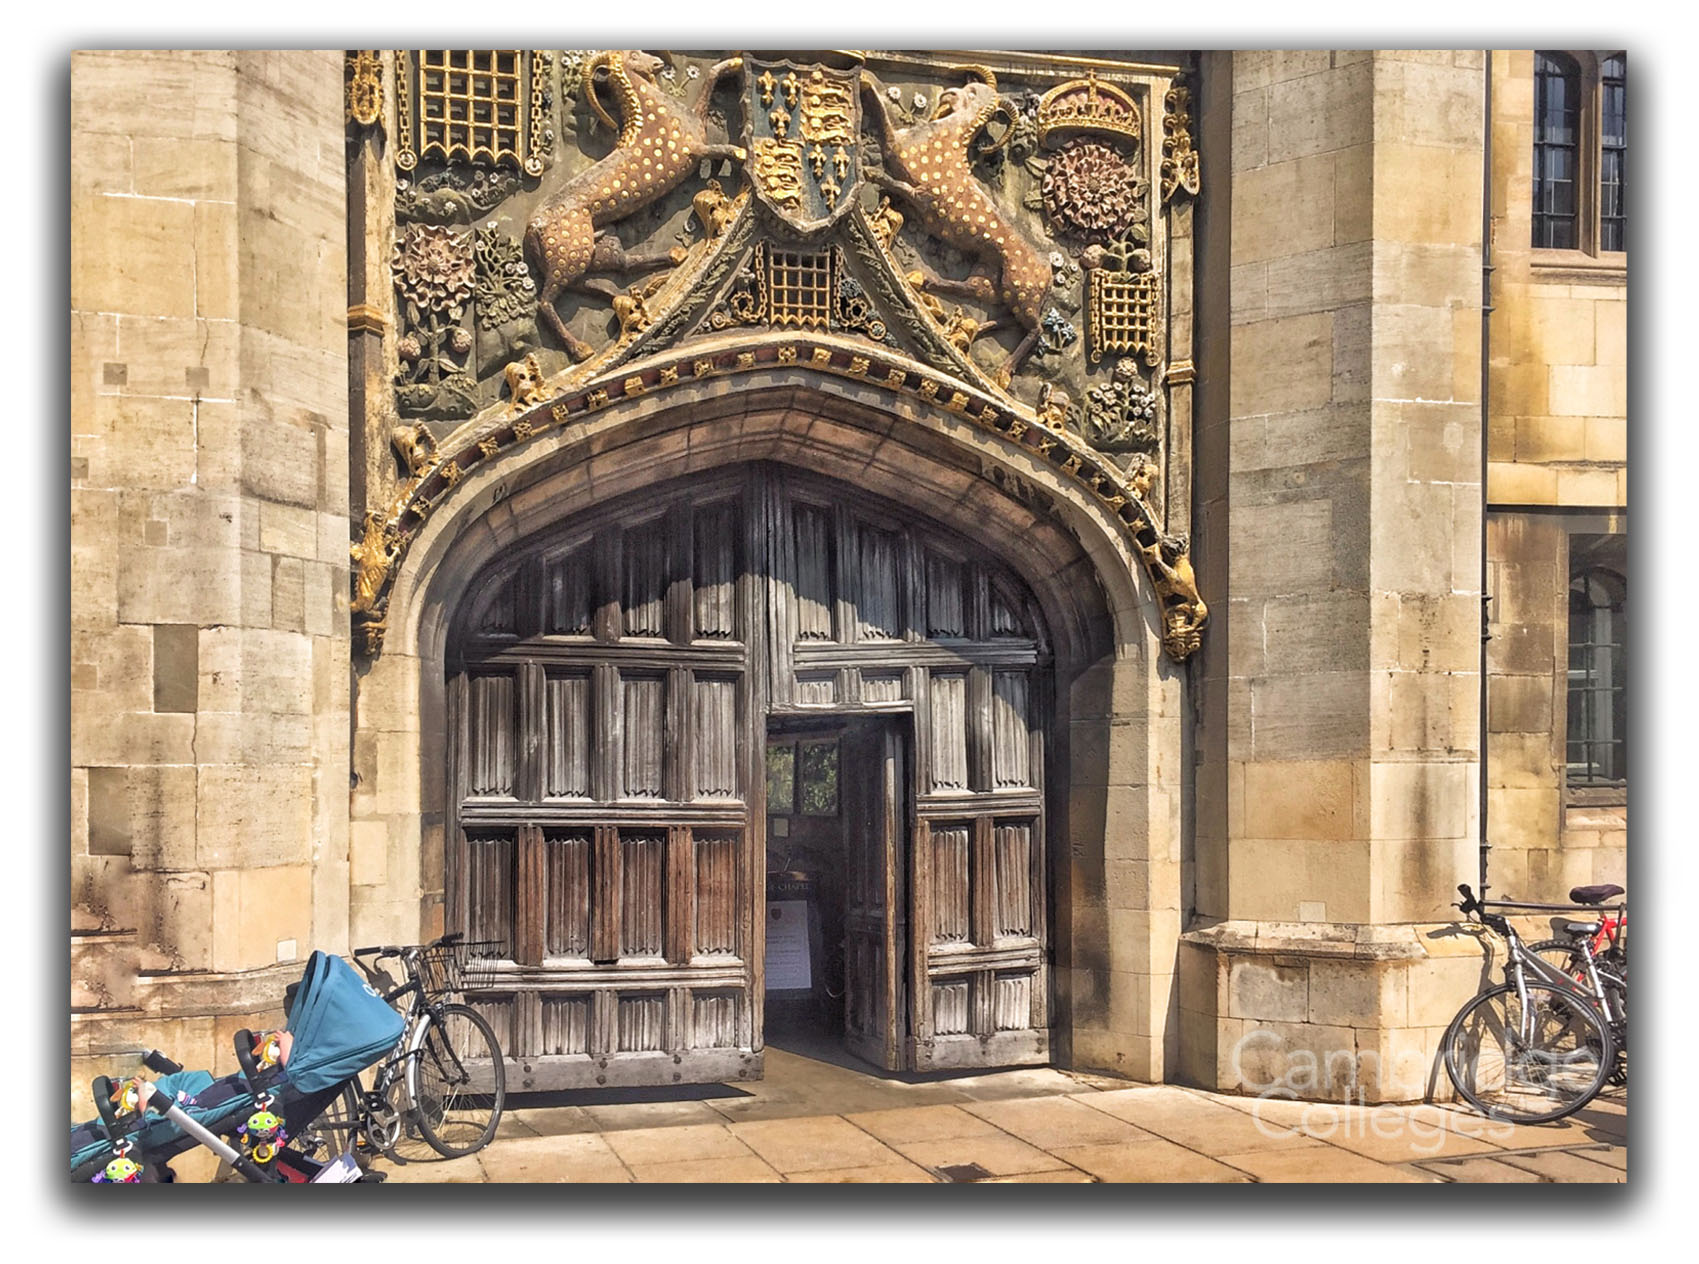 The Great Gate at Christ's College, Cambridge